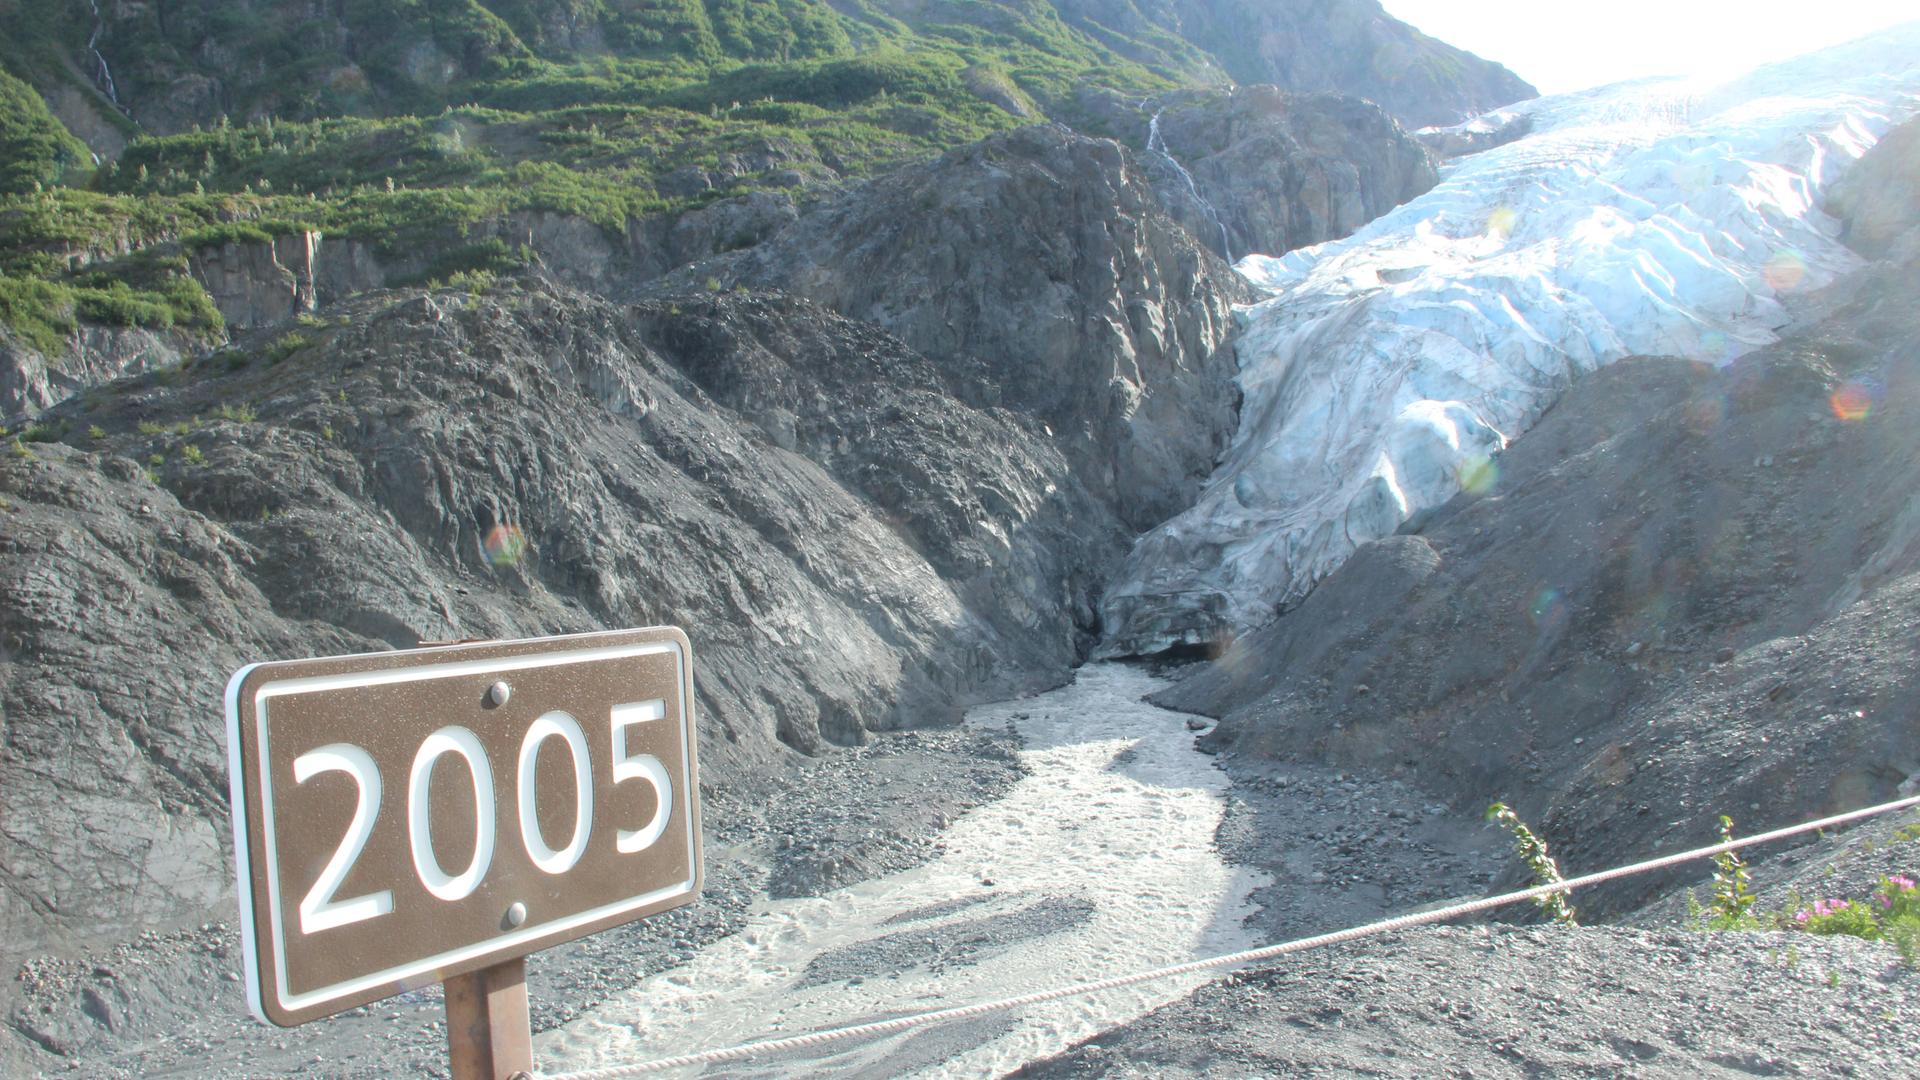 The Exit Glacier, a two-and-a-half hour drive outside of Anchorage, has posts that mark the glacier’s rapid retreat. This one shows the glacier’s reach just 12 years ago. 